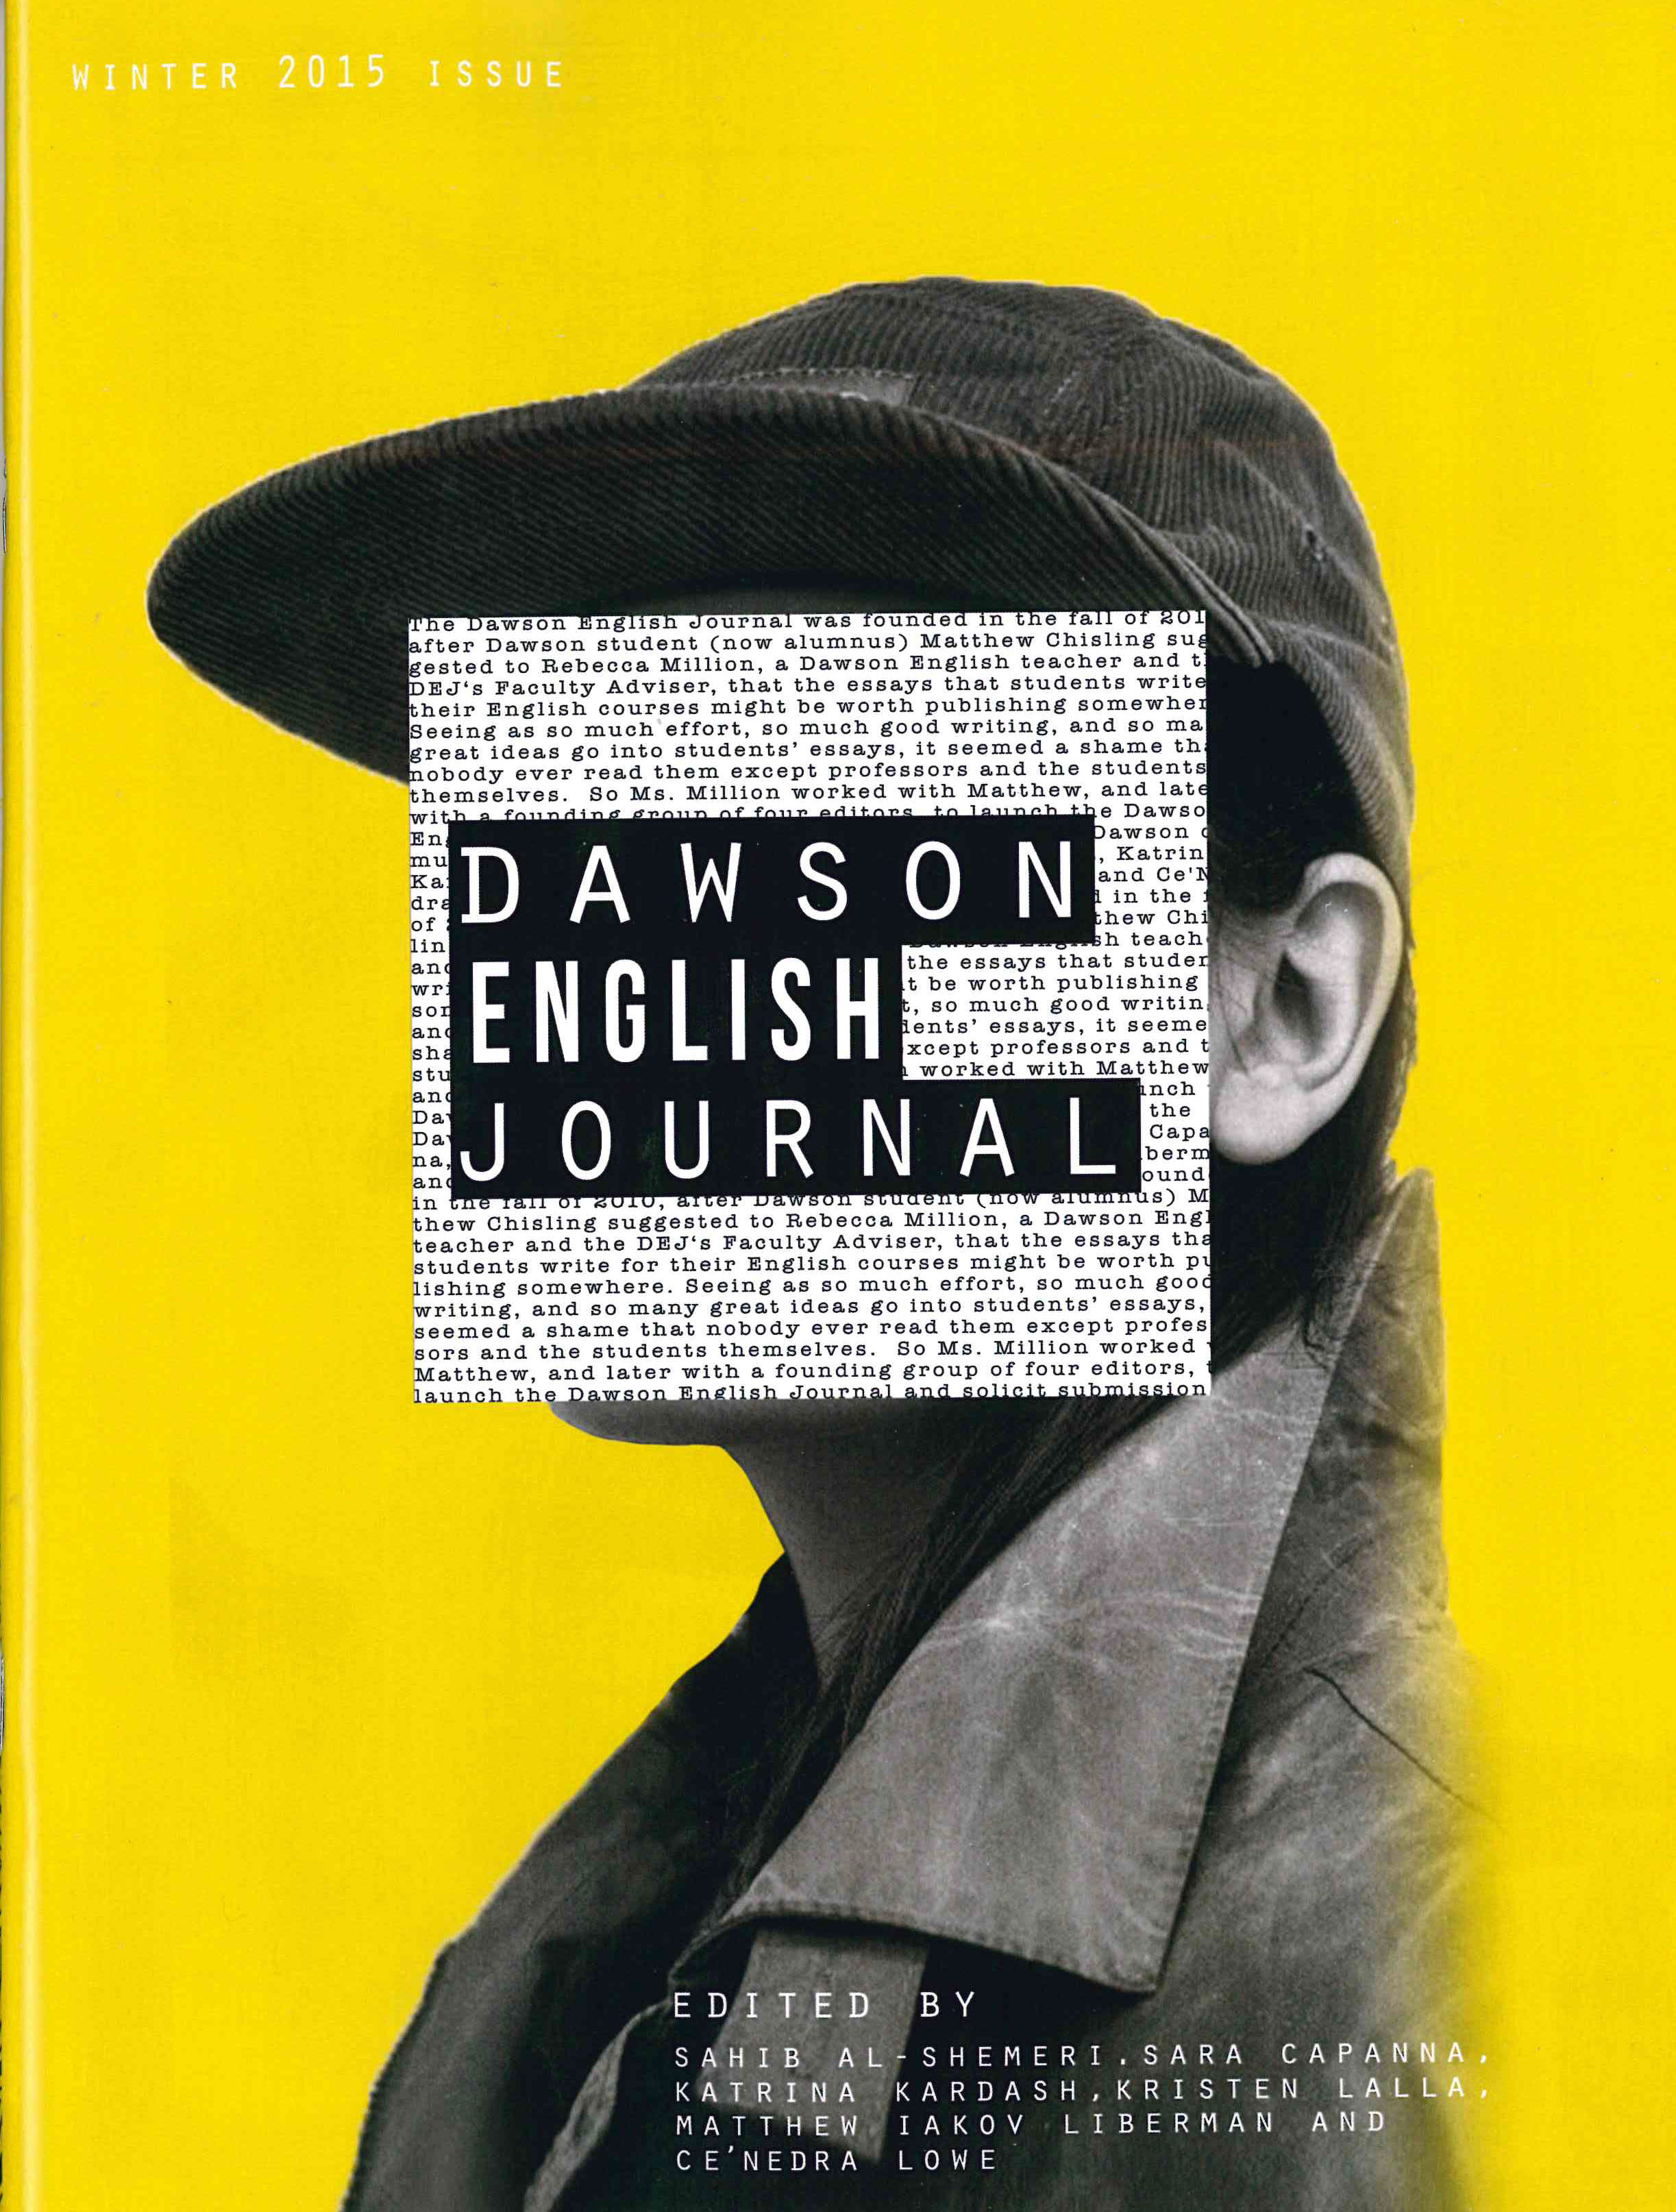 2015 English Journal: Each year the students come together to create the Dawson College English Journal. This is available both in print and online. This project brings together students from a diversity of programs and provides a creative outlet for many people. The editors came from various programs, from Health Science to Literature to Social Service. This year, the editors received 44 submissions from students in a wide variety of programs.